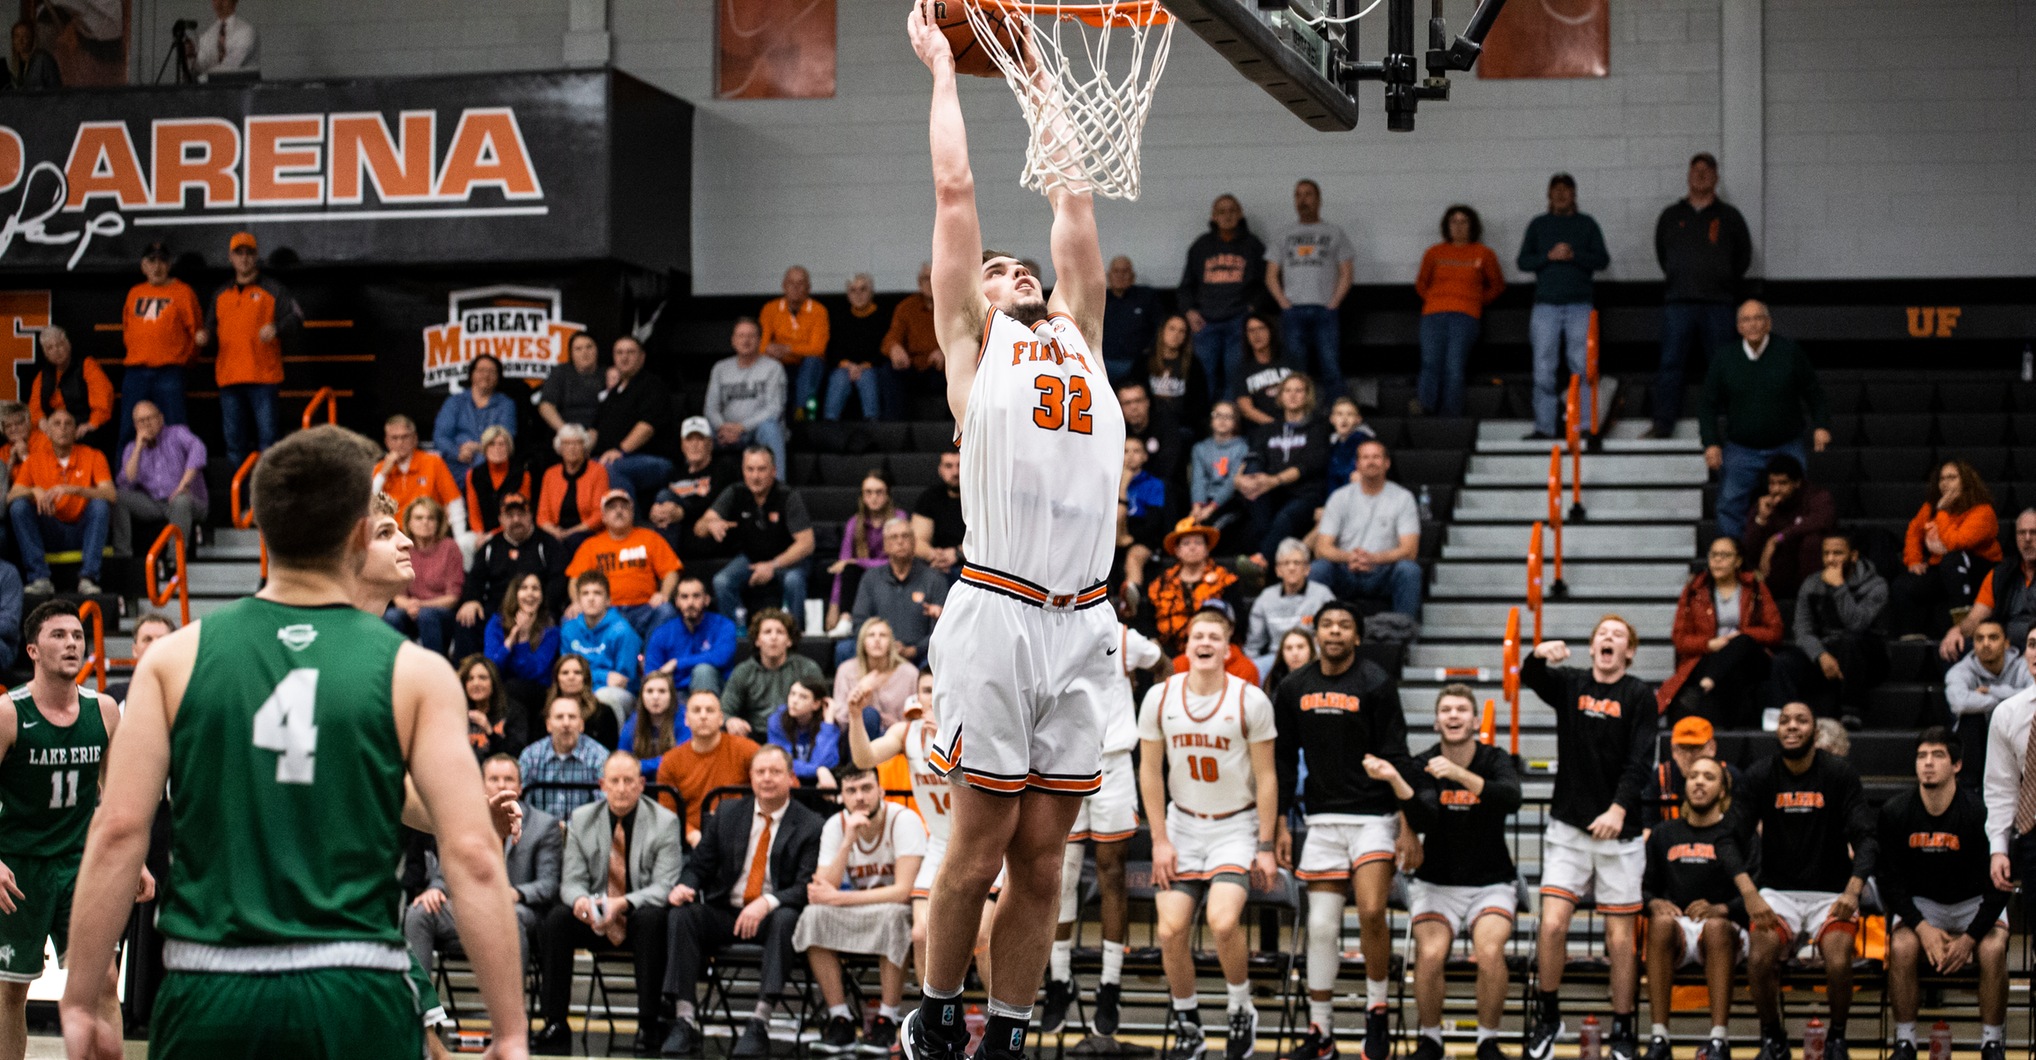 Oilers Outscore Lake Erie by 28 in Second Half to Win G-MAC Quarterfinal